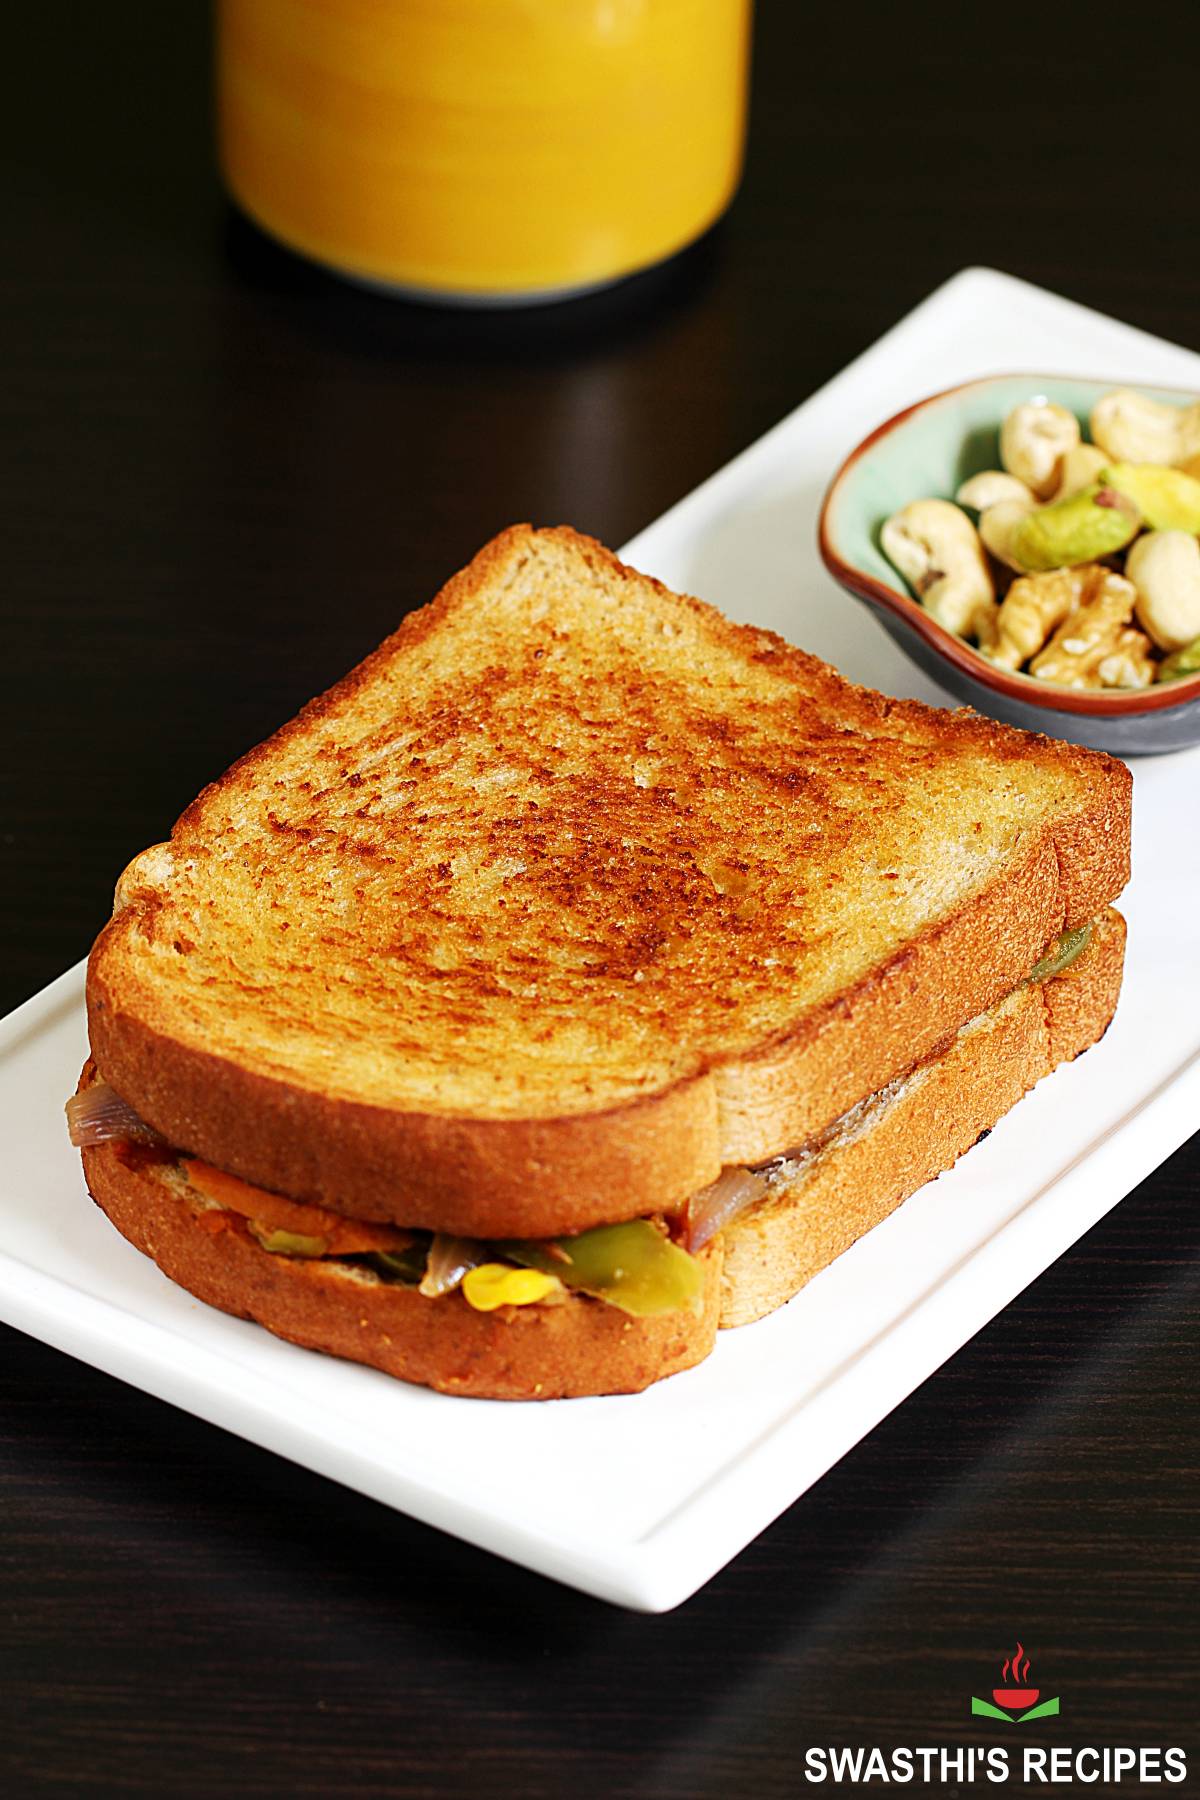 Veg sandwich also known as vegetable sandwich served in a white plate